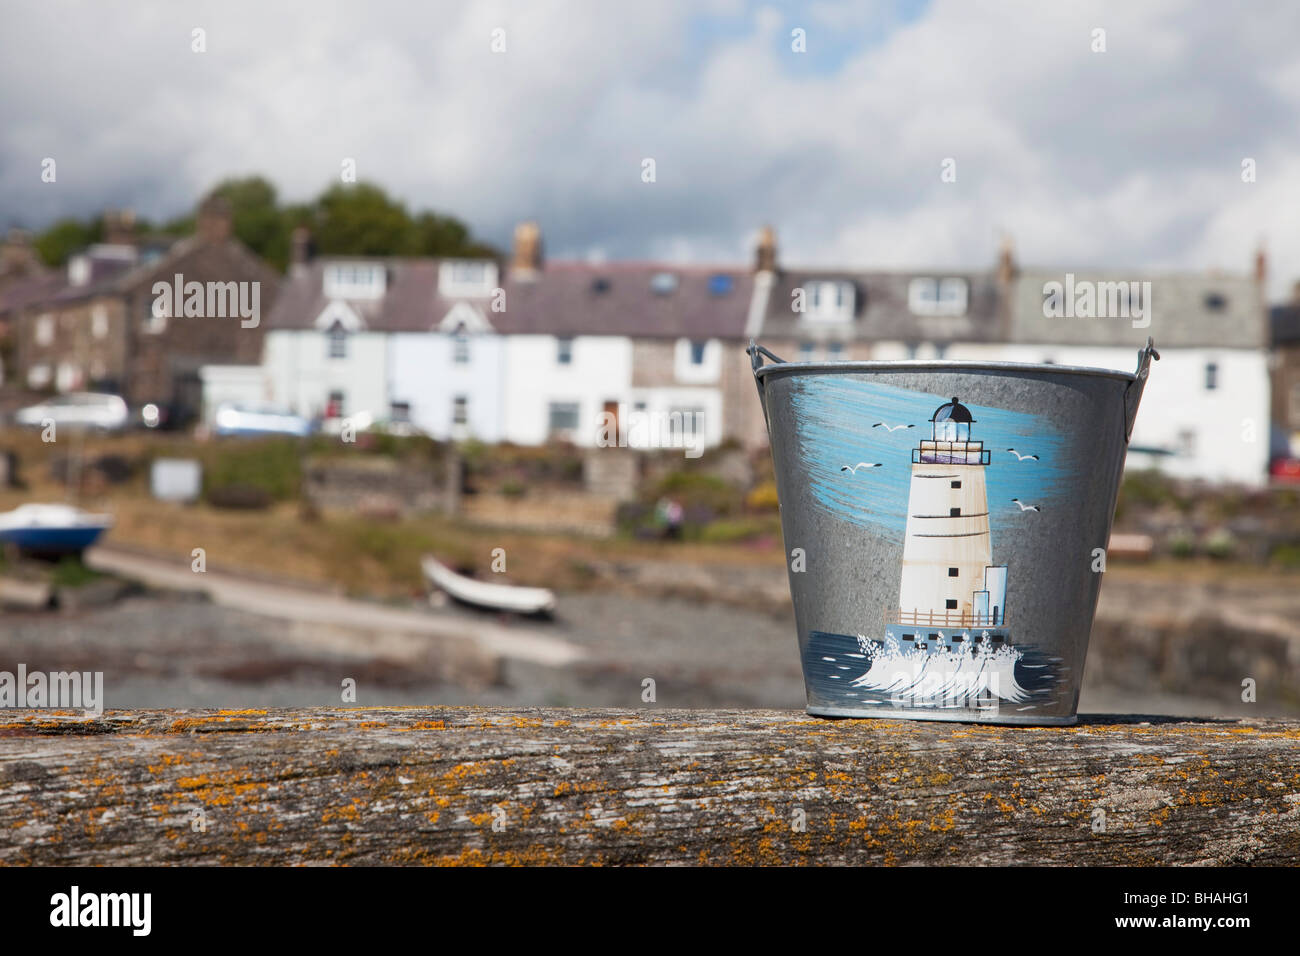 Pail with image of lighthouse on it Stock Photo